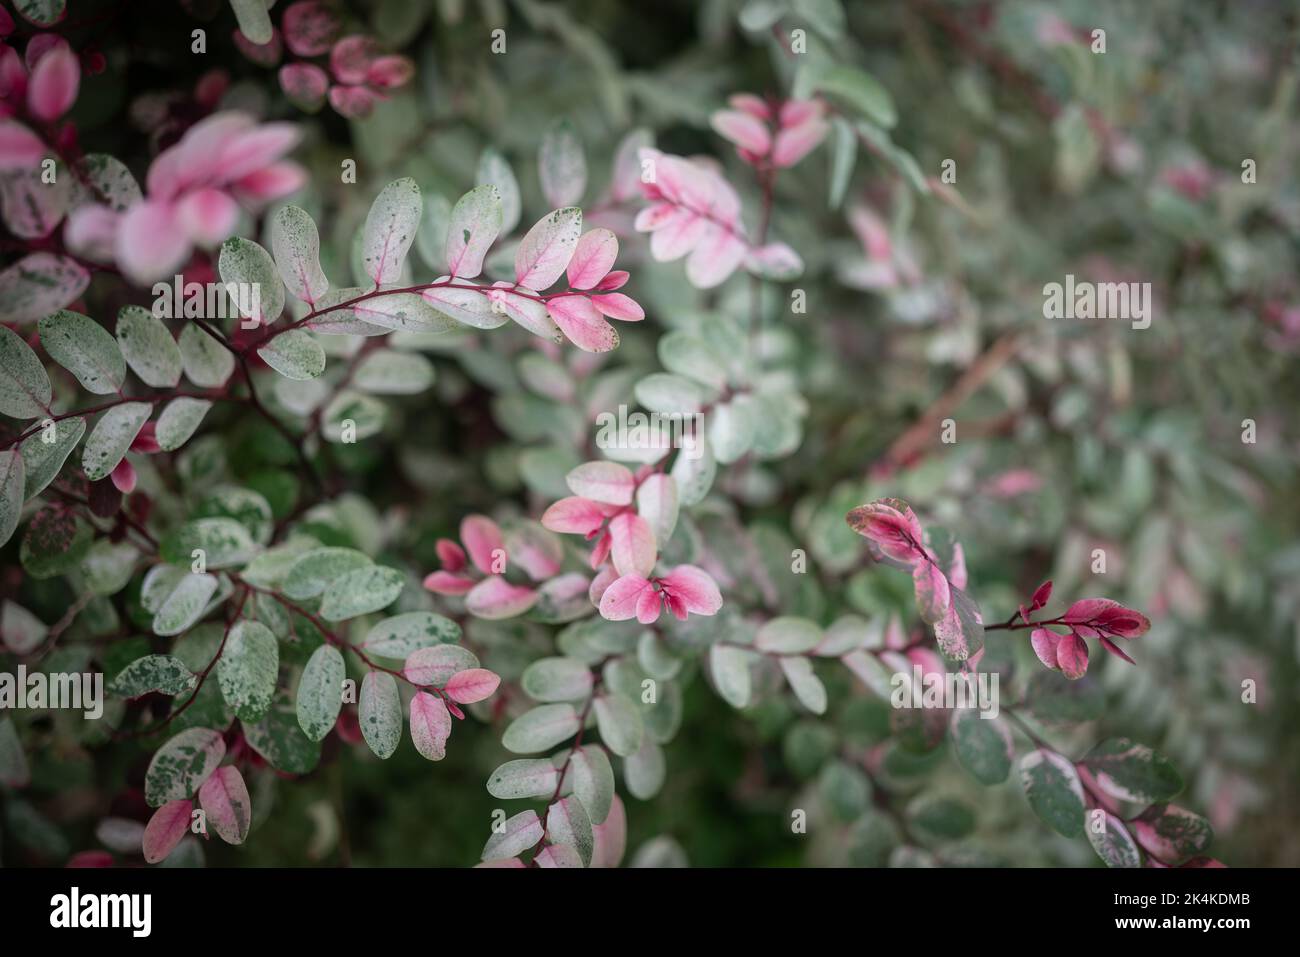 White leaves with light green and pink of snowbush or Foliage-flower background Stock Photo